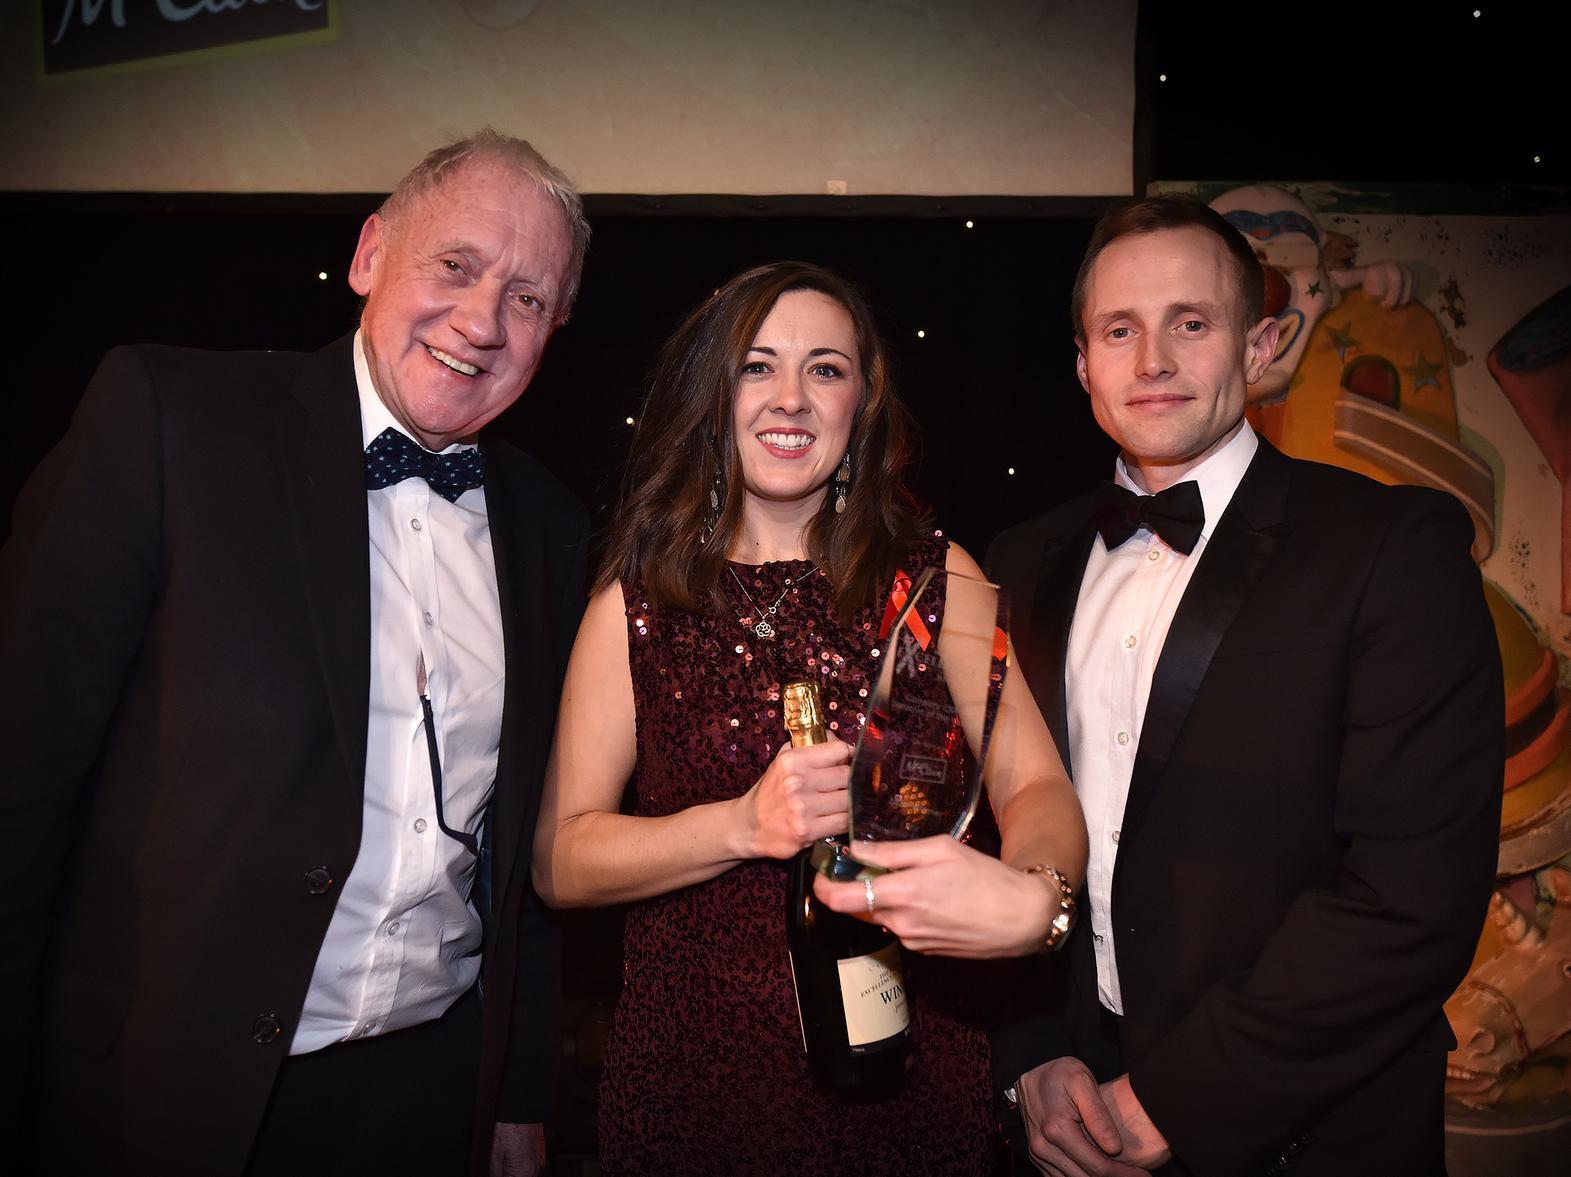 Harry Gration, Lindsay Mason from winning firm Cura Financial Services, and a representative from McCain Foods.